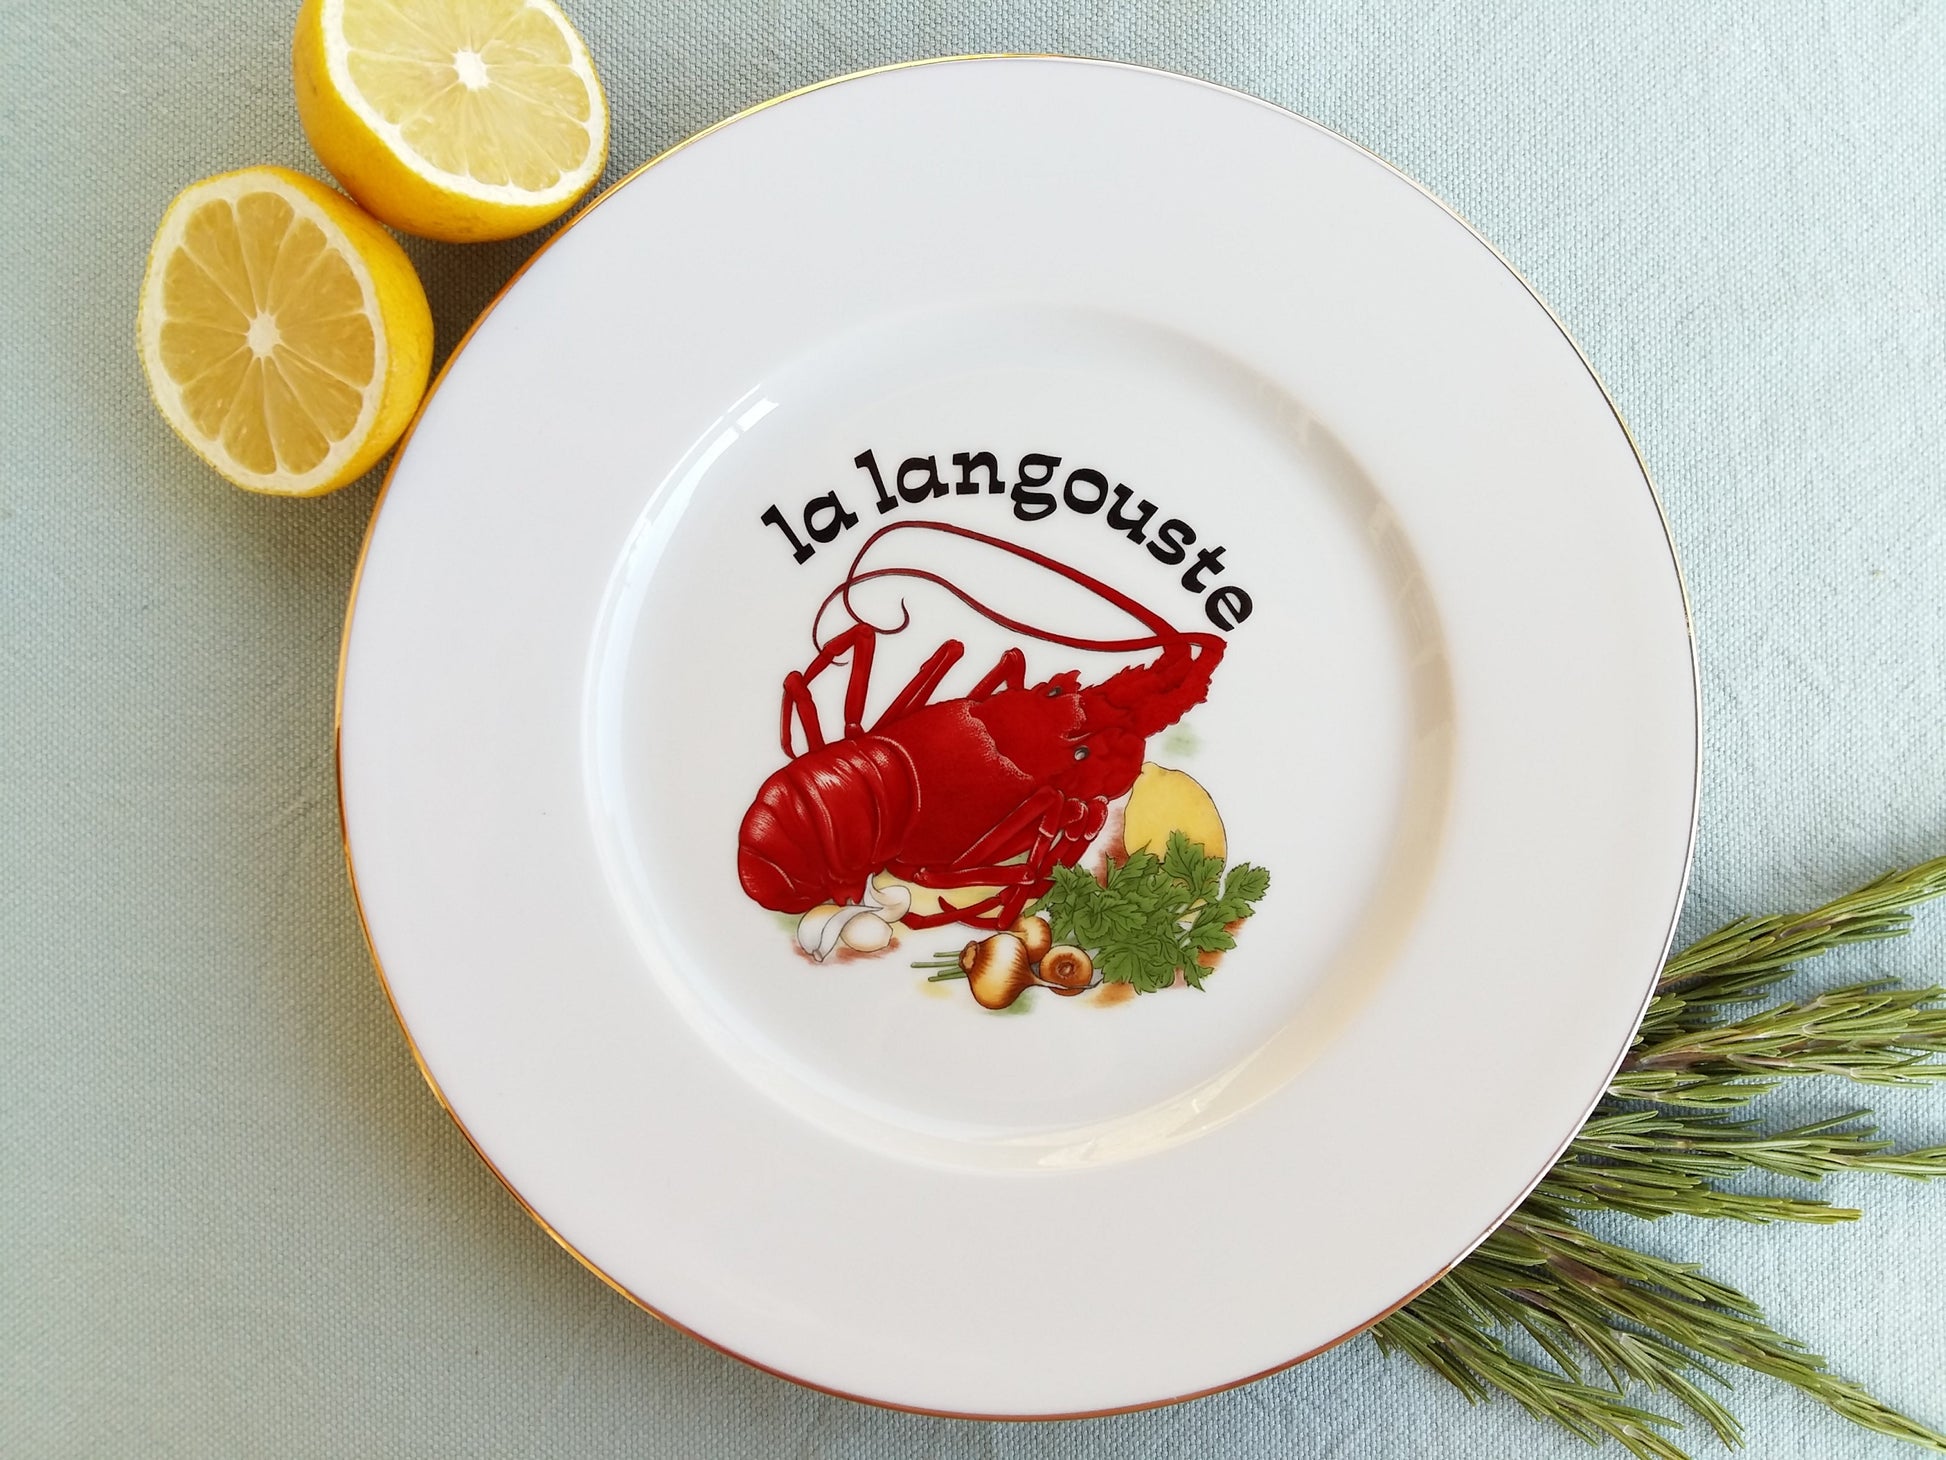 Six French Limoges Porcelain Seafood Plates. from Tiggy & Pip - €156.00! Shop now at Tiggy and Pip